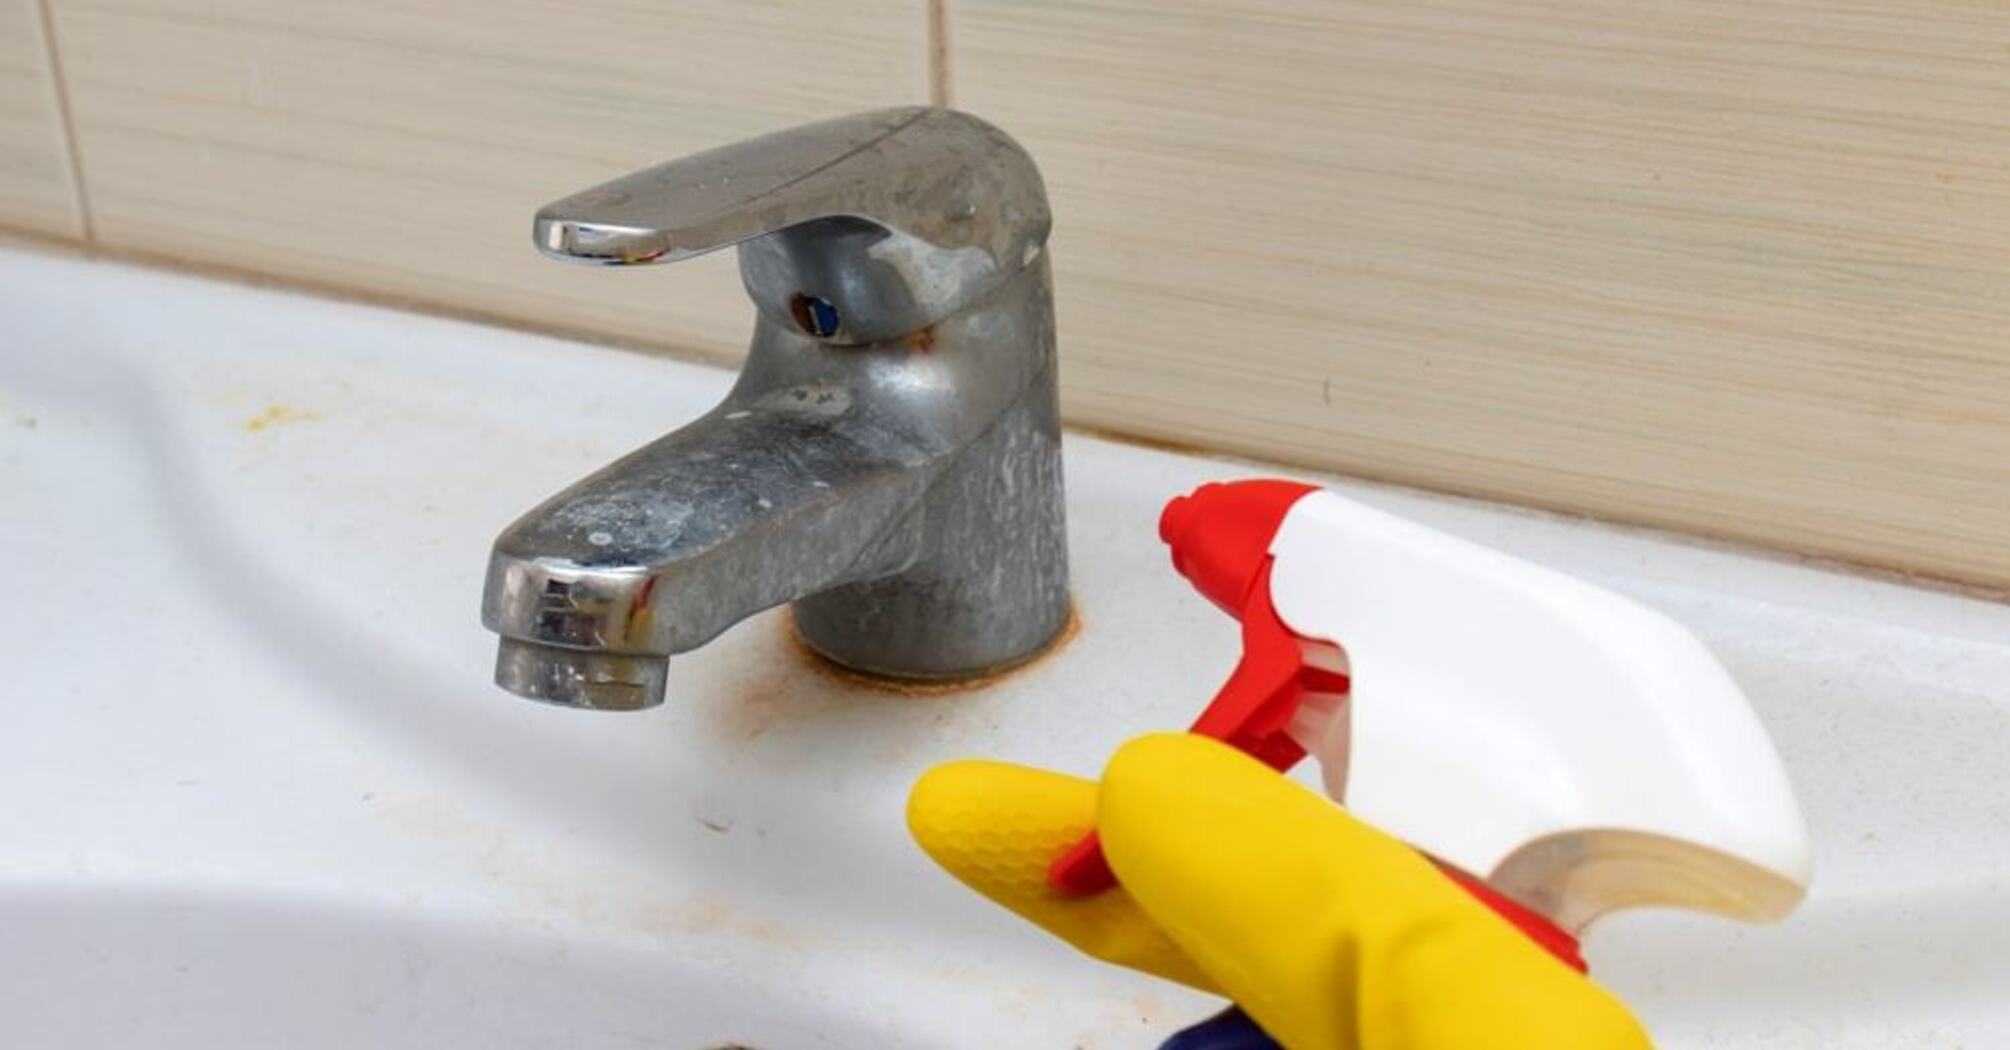 How to clean rust on plumbing